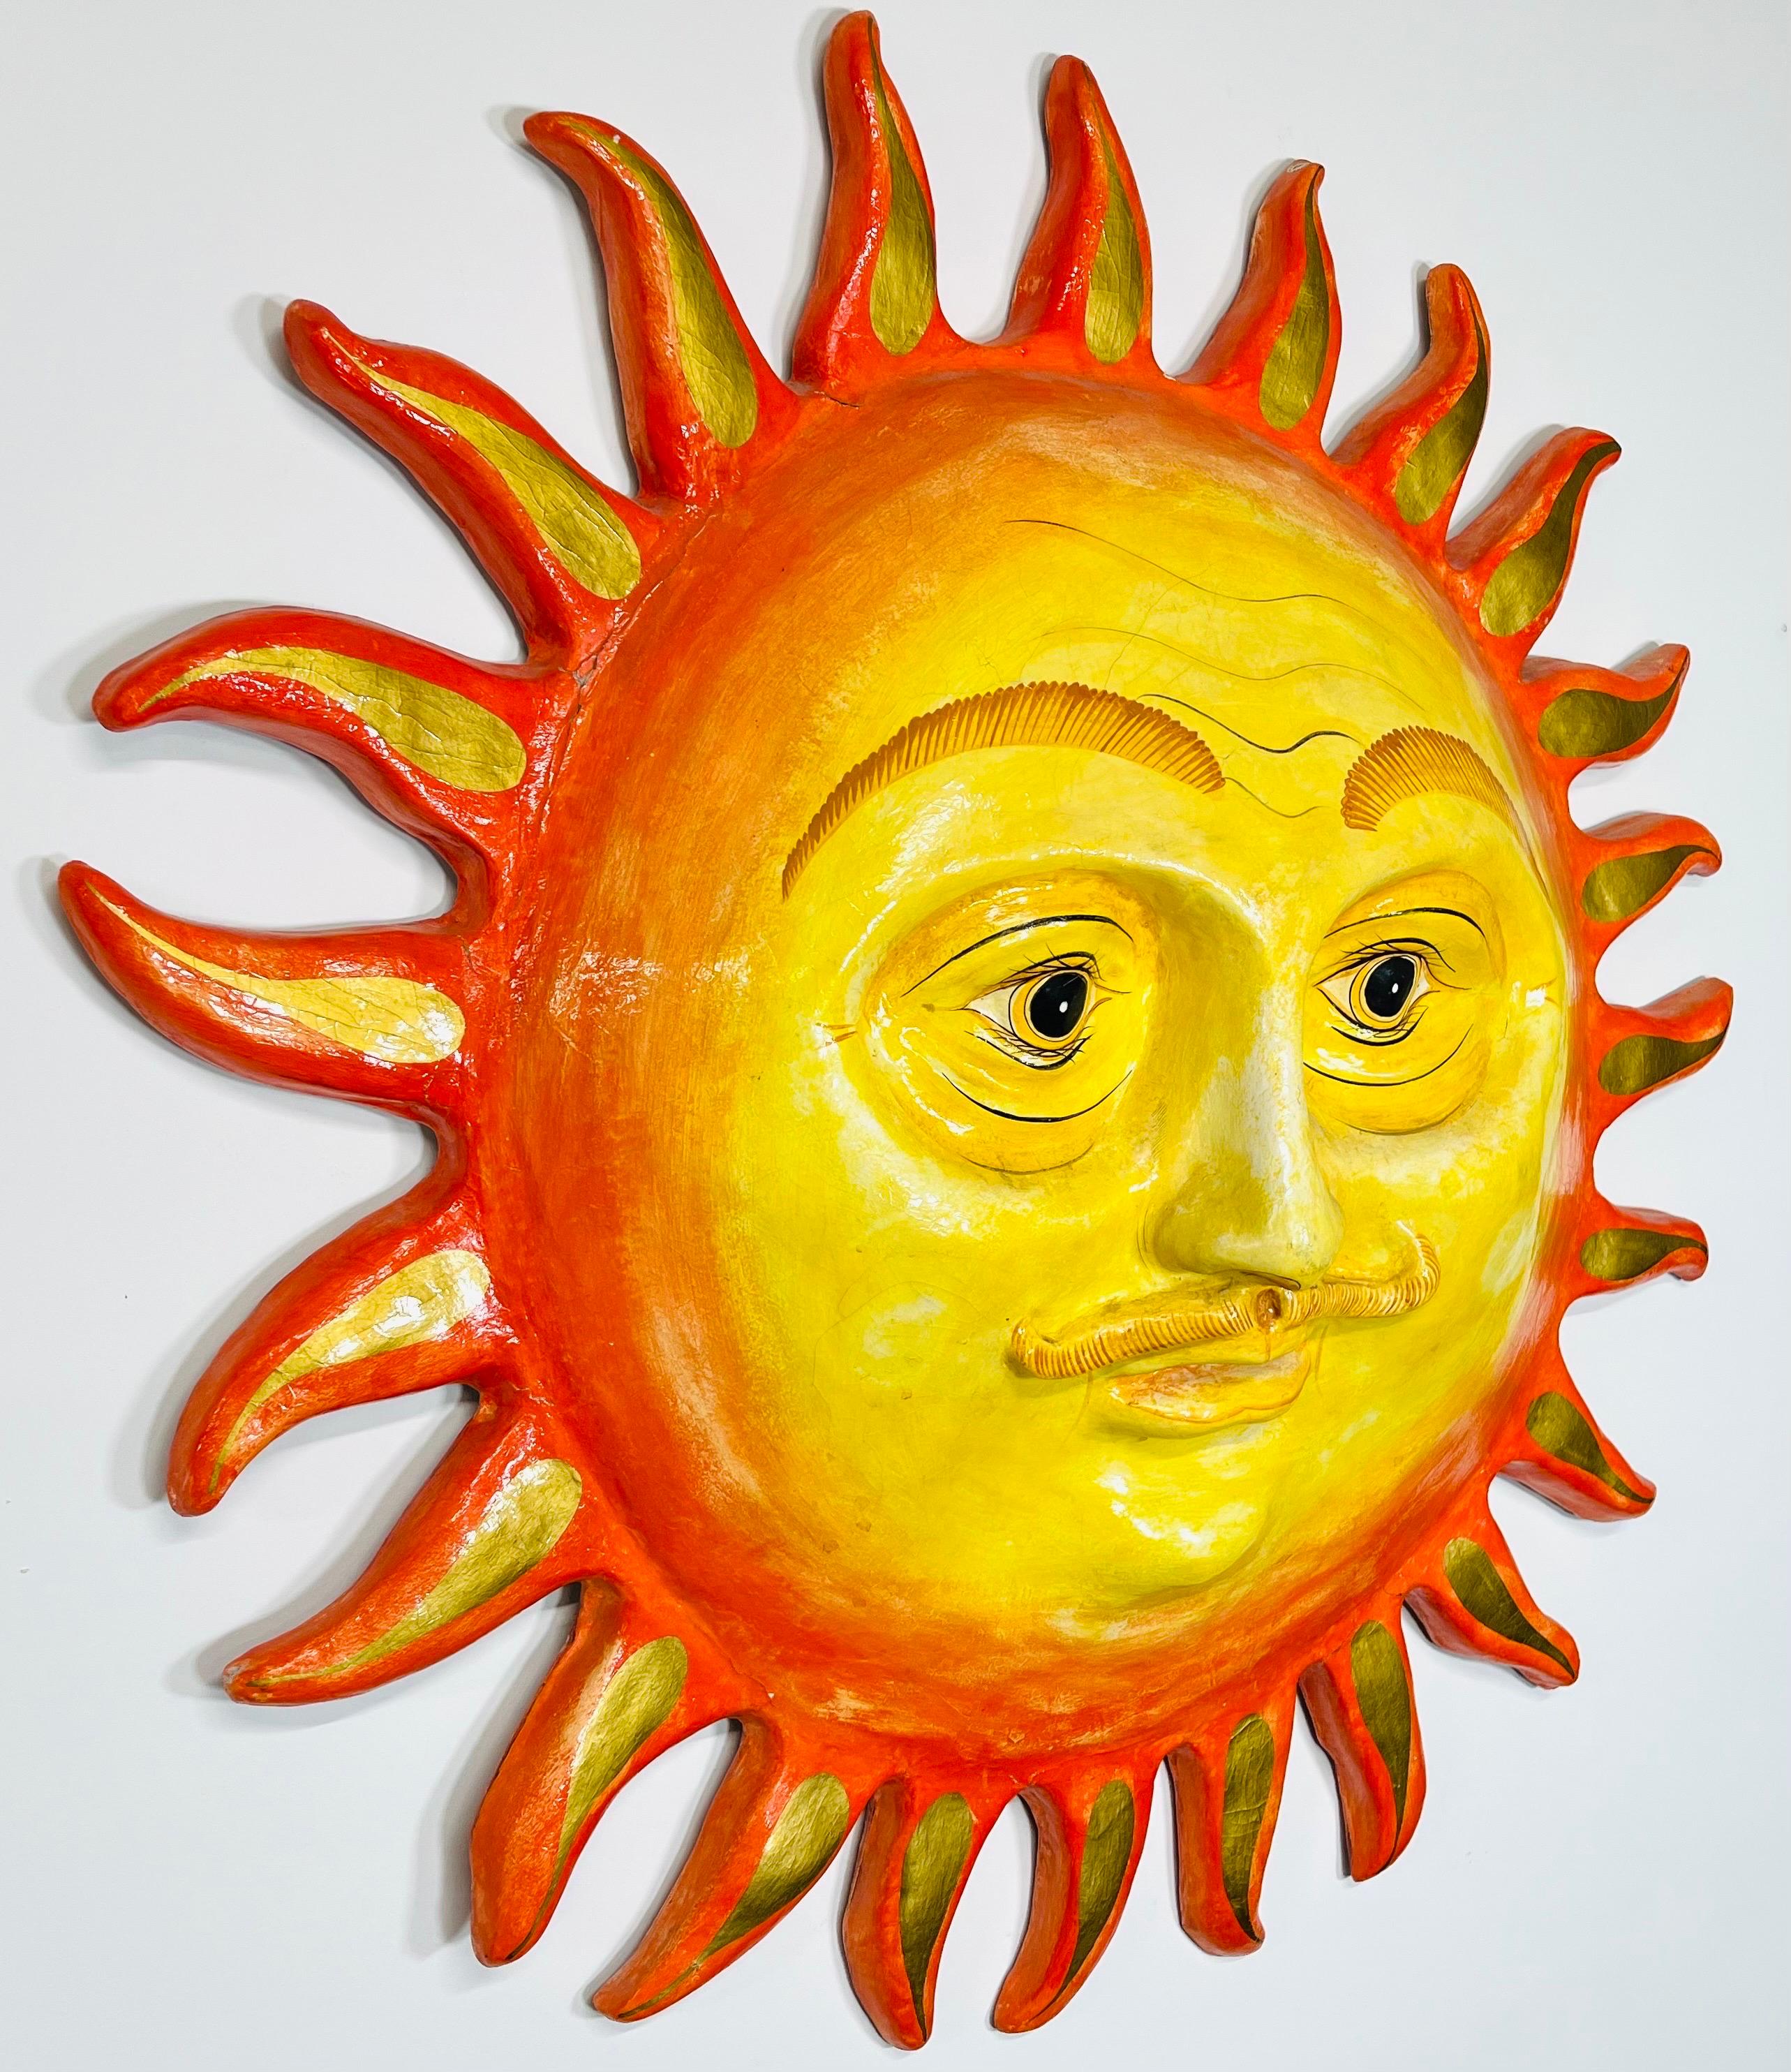 A delightful and fun wall sculpture titled “Smiling Sun” created in paper mache and hand painted by the artist. Attributed to Sergio Bustamante and imported from Mexico Circa 1970. 
In wonderful vintage condition having well maintained vibrant